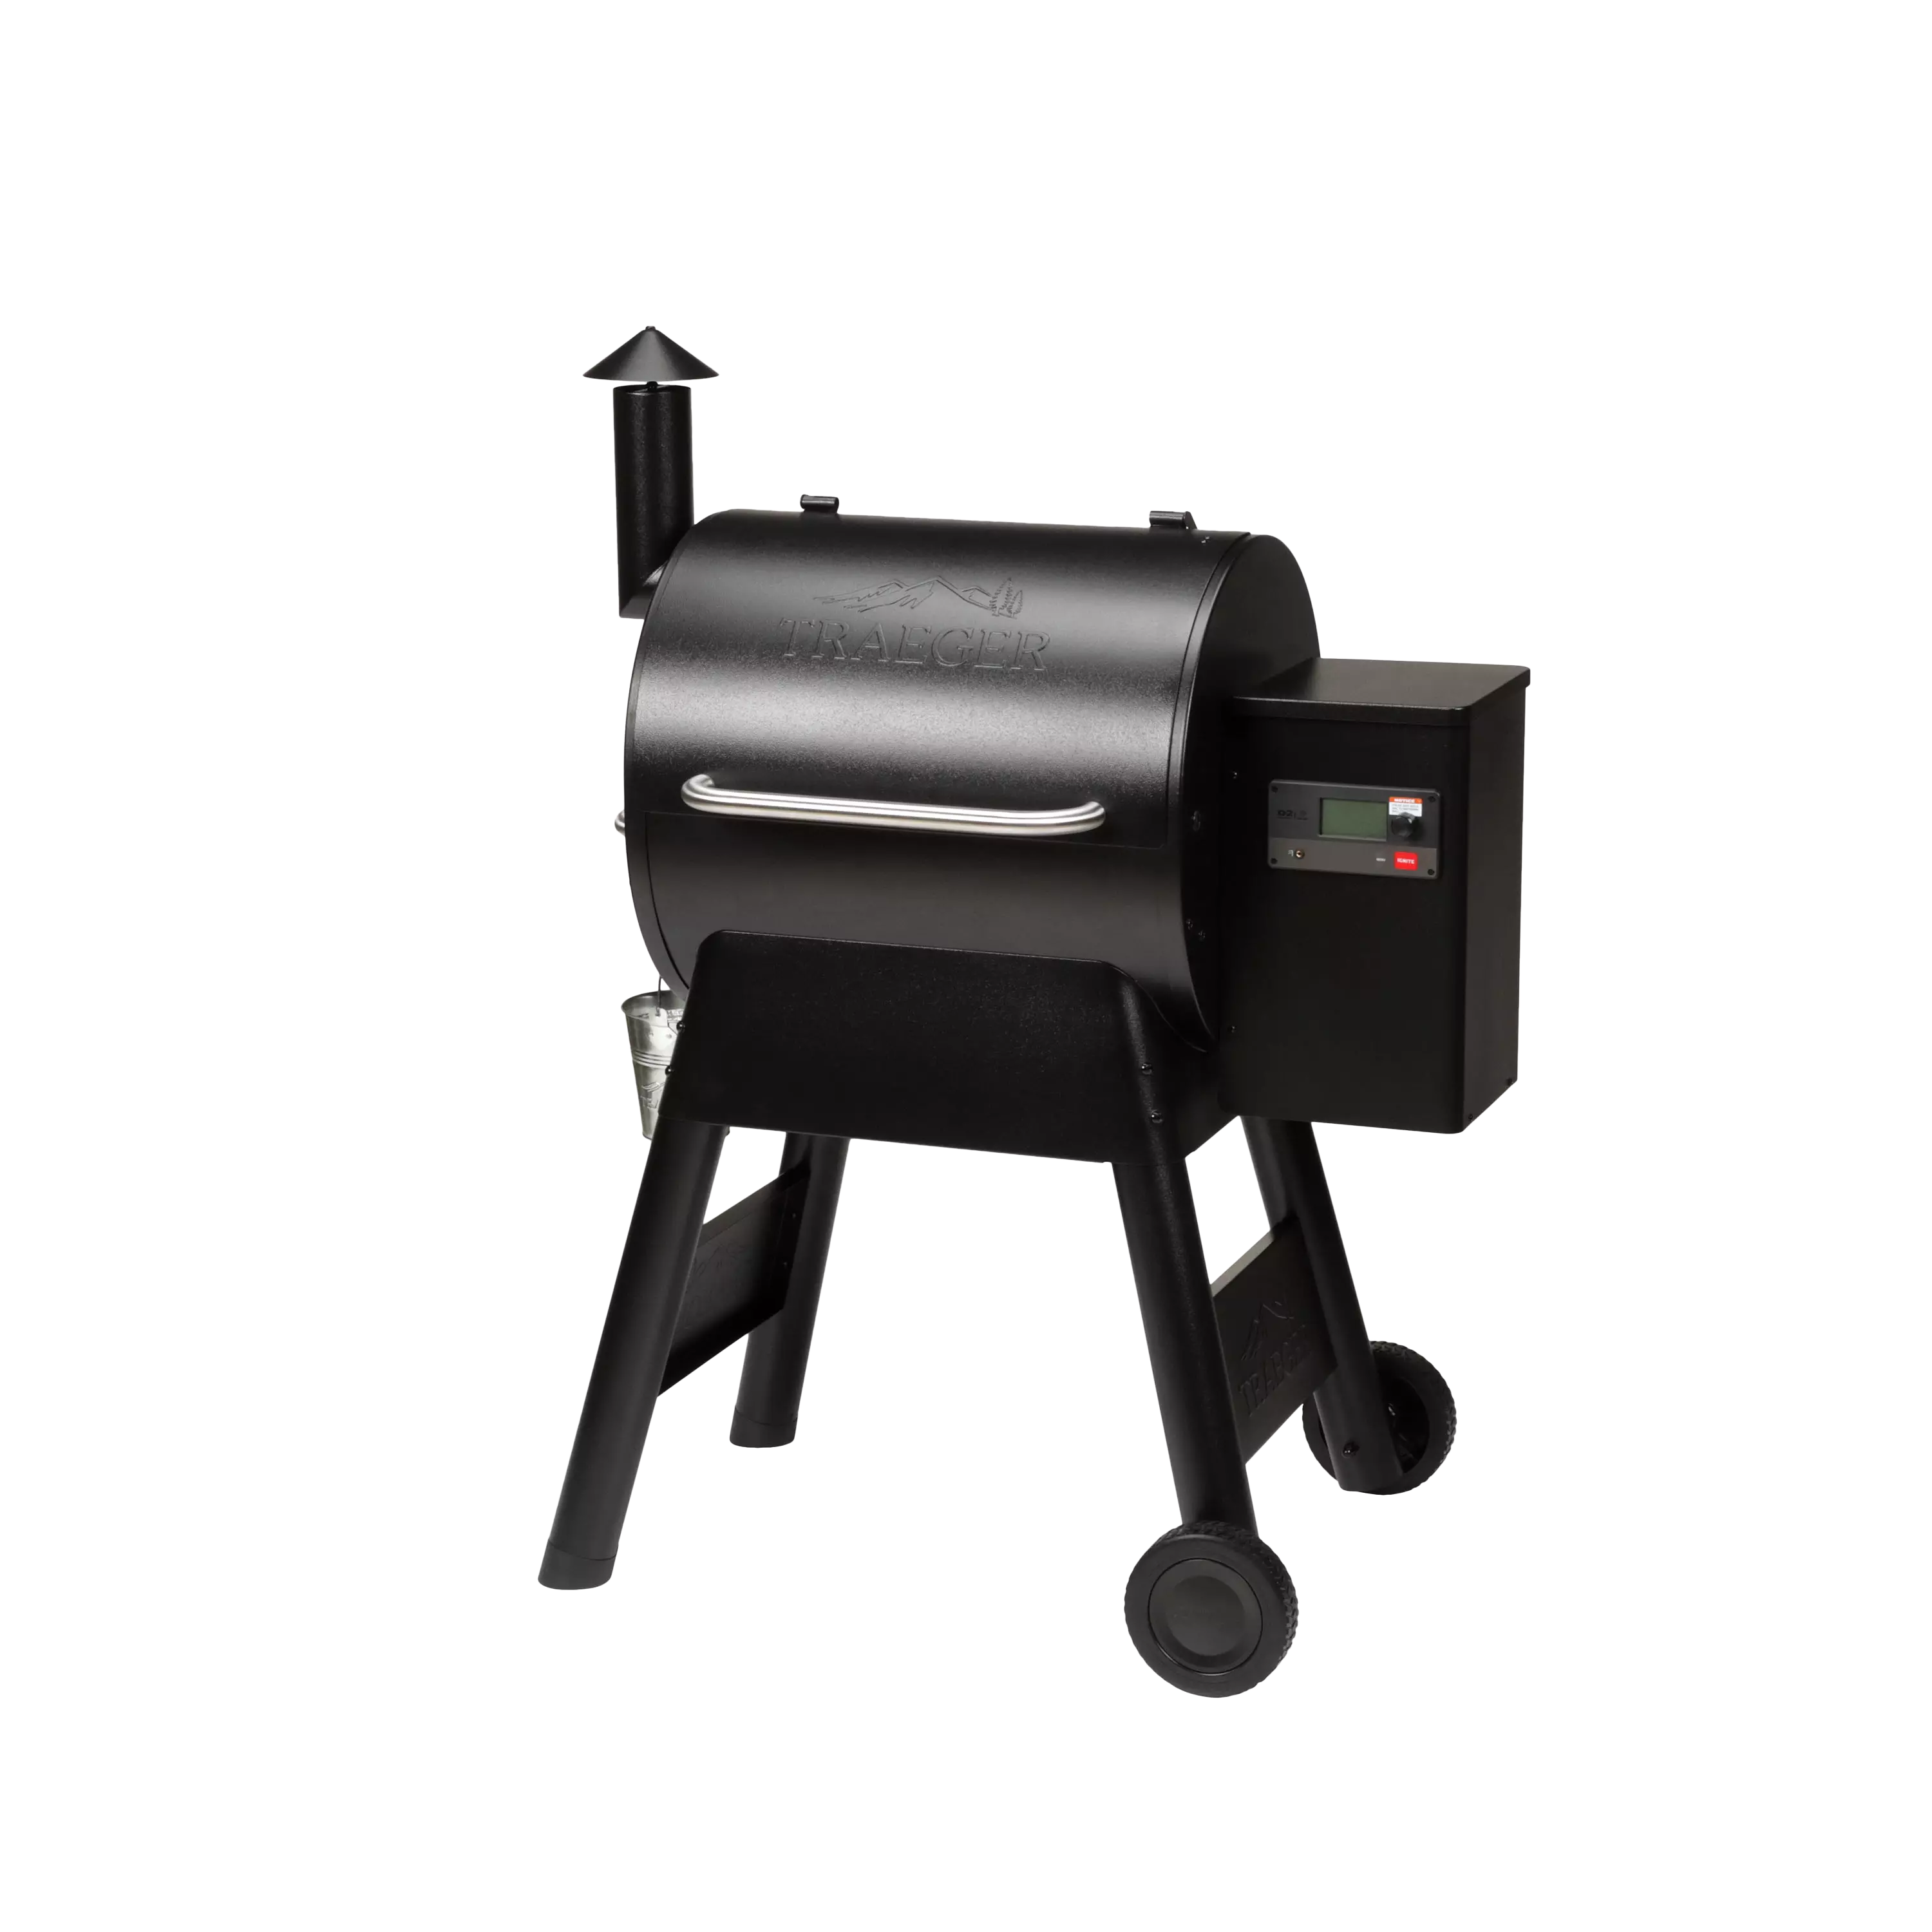 at-02 Smart Digital Wireless Cooking Grilling Smoker BBQ